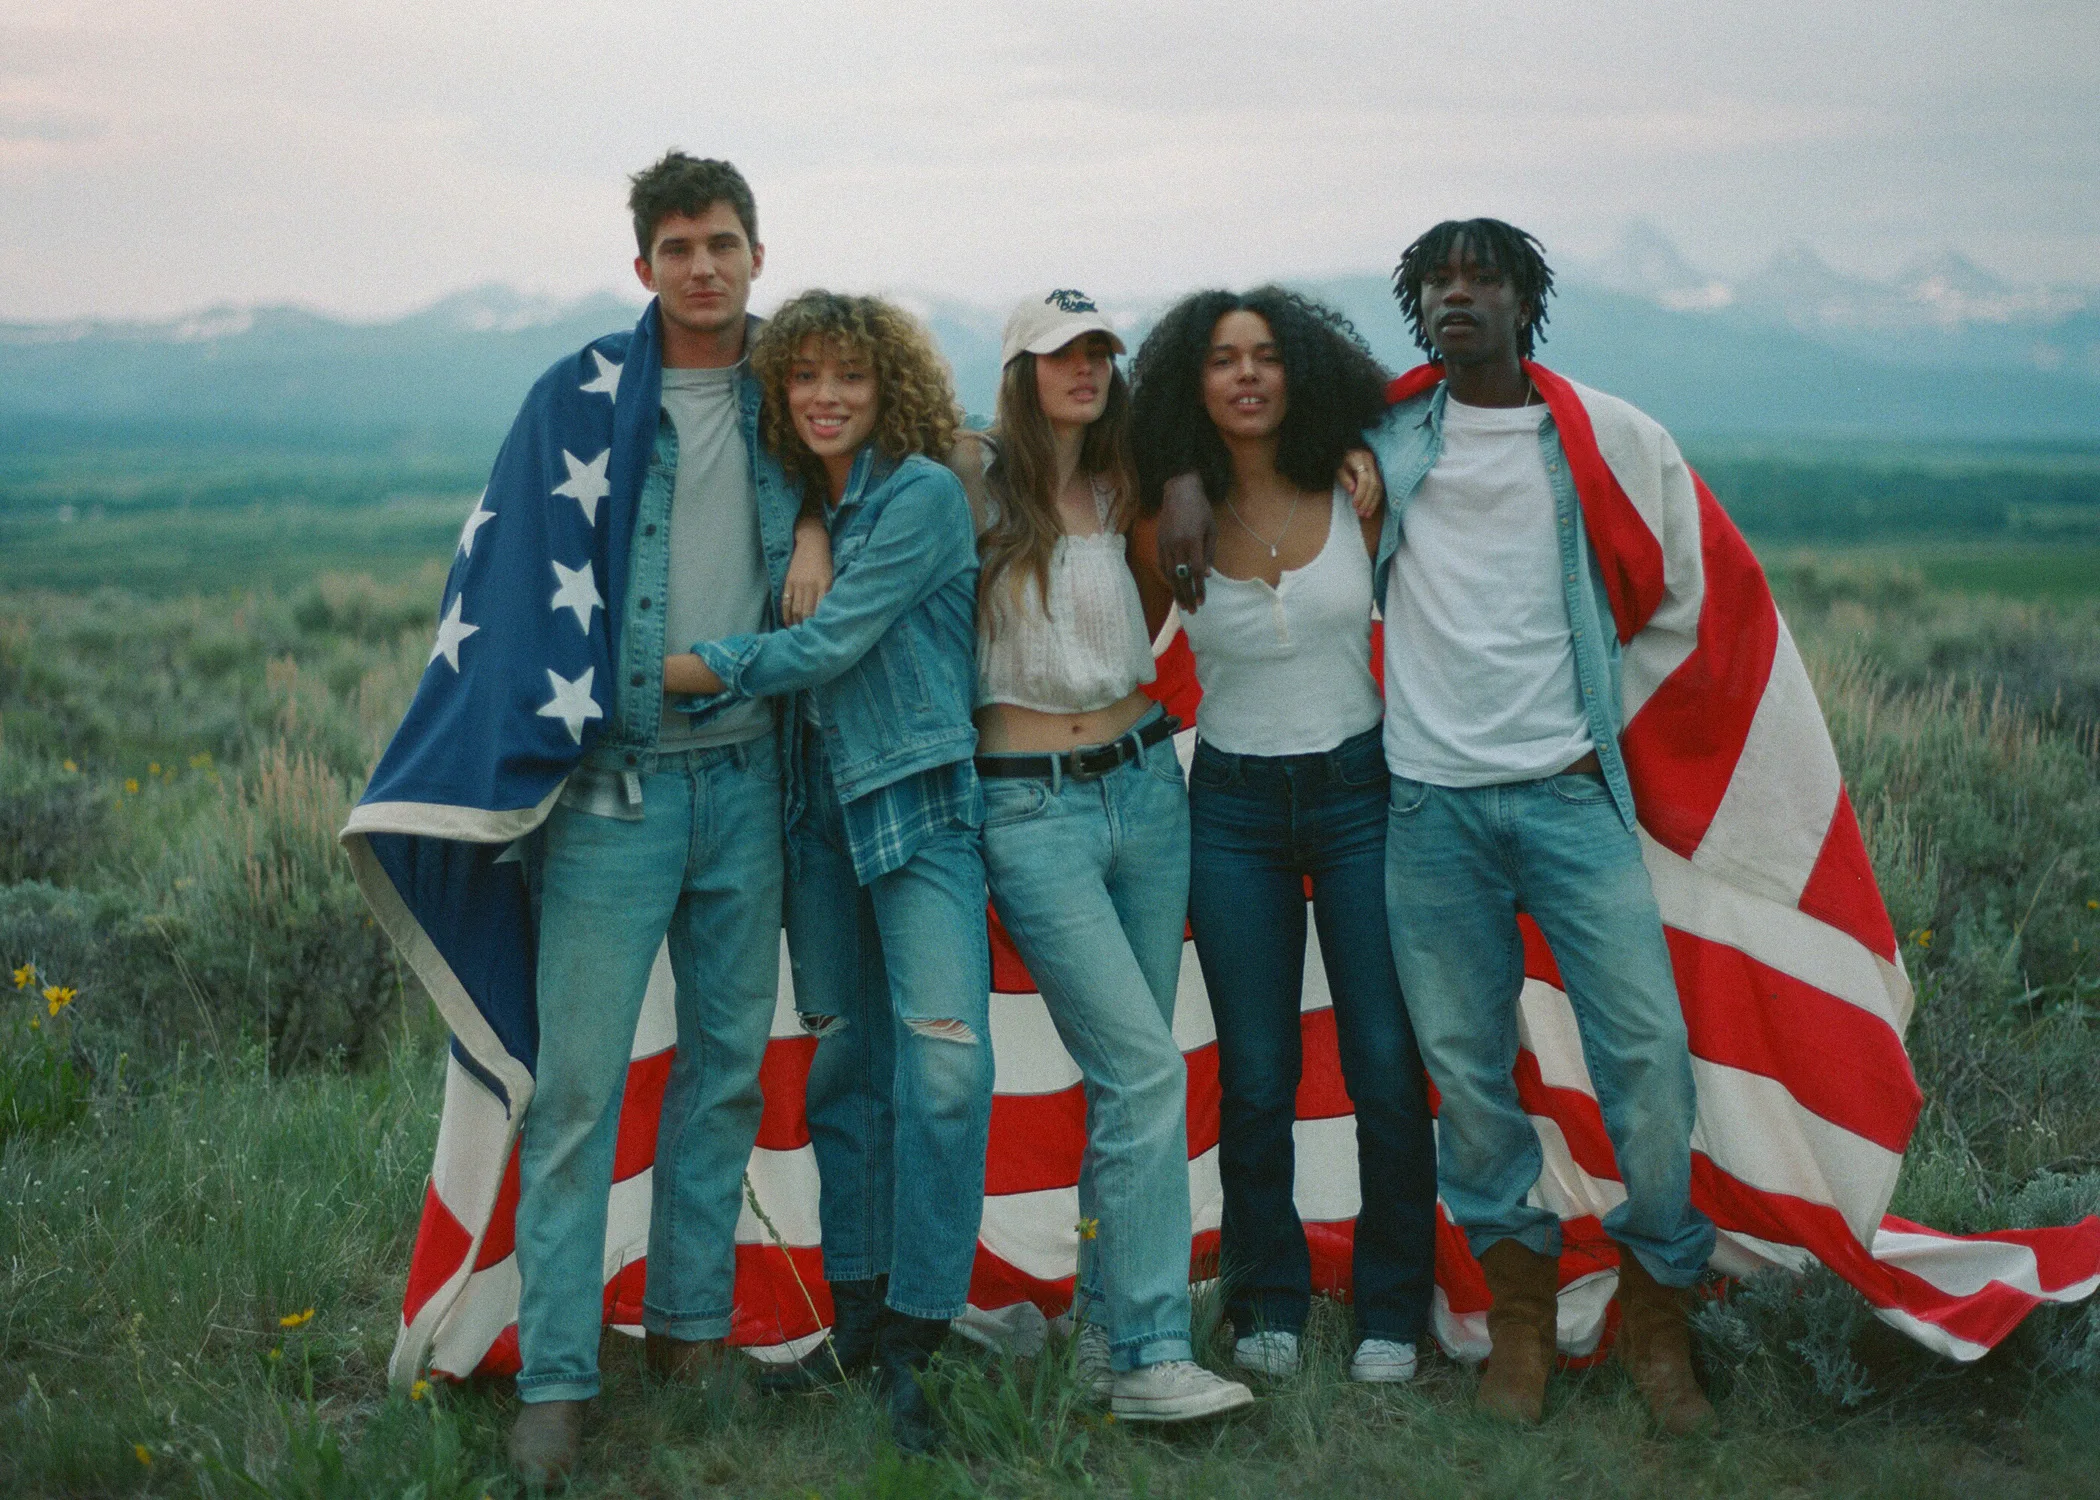 Barbato Collective, BarbatoCo, Daniel Barbato, Creative, Creative Direction, Art Direction, Lifestyle, Campaign, Brand, Lucky Brand, Americana, American Flag, Denim, Denim Campaign, Denim Editorial, Denim Photoshoot, Jackson Hole, Wyoming, Big Sky, Outdoors, American Landscape, America, USA, Iconic, Epic, Timeless, Fashion, Style, Jeans, Rugged, Western Style, Western Wear, Womenswear, Menswear, Adventure, Roadtrip, Effortless, Casual, Ethereal, Pattern, Sweater, Americana, Road, Scenic, Horizon, Film, 120, Medium Format, American Flag, Patriotic, Group, Friends